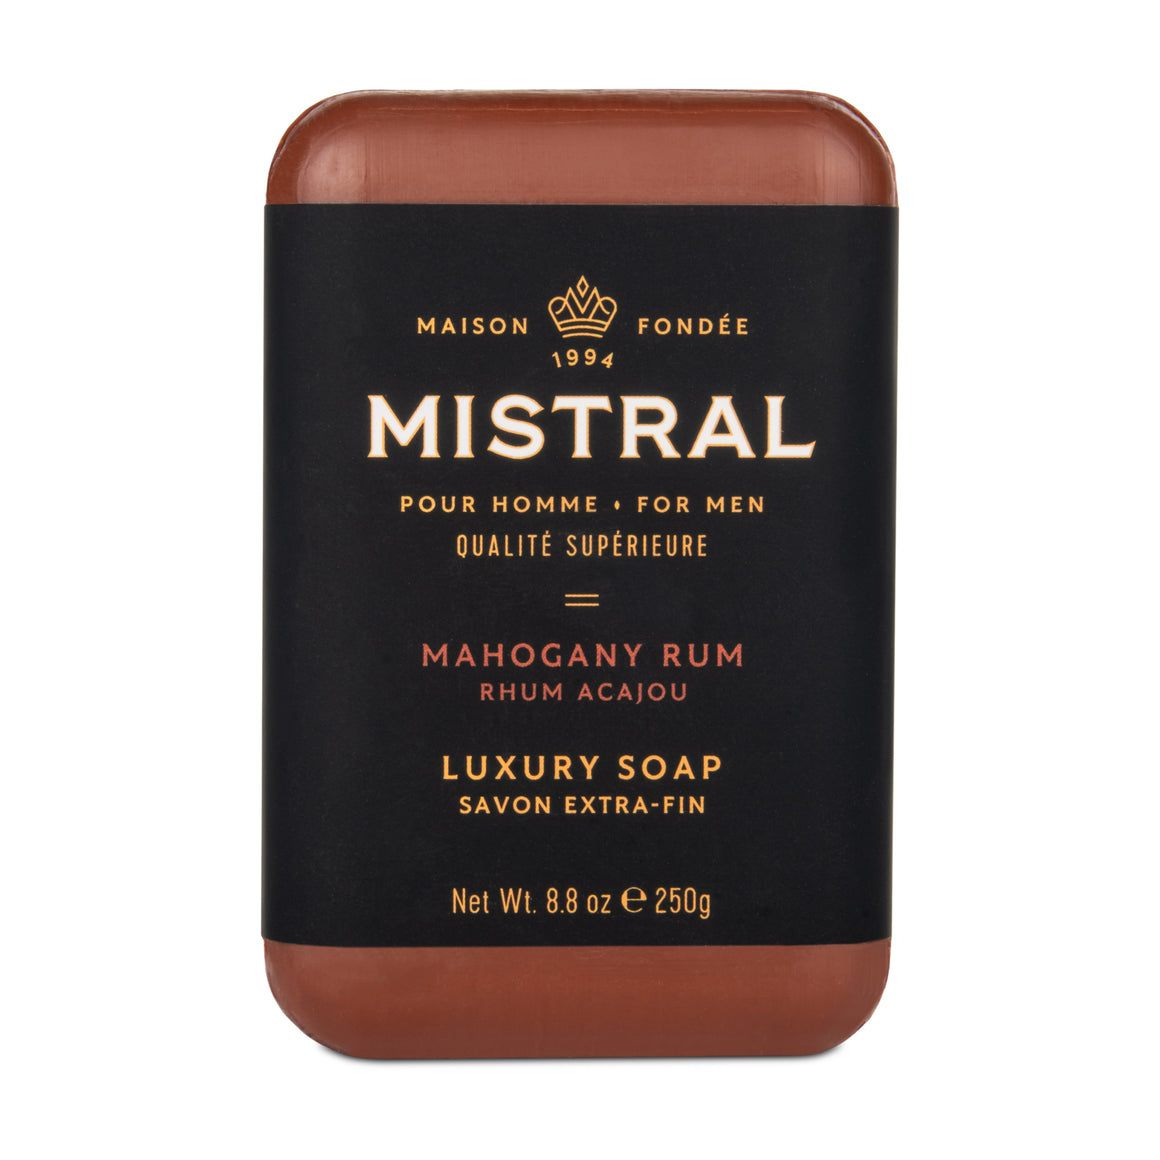 Mistral - Luxury French Bath & Body: Men's Grooming products